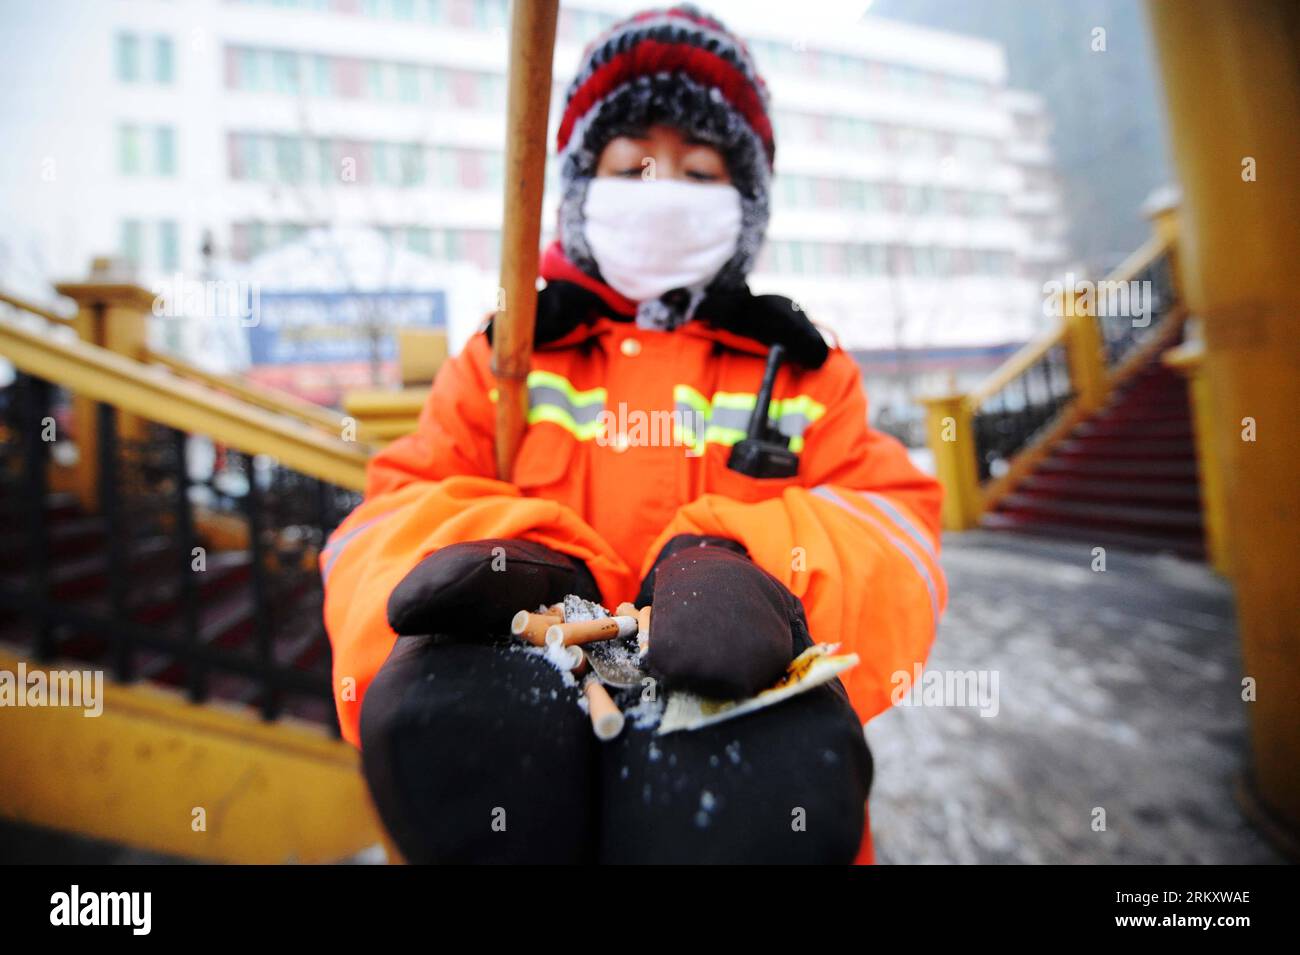 Bildnummer: 59095370  Datum: 16.01.2013  Copyright: imago/Xinhua HARBIN, Jan. 16, 2013 (Xinhua) -- Sanitation worker Yang Weixia who wears a mask shows cigarette ends she picked up on a road in Harbin, capital of northeast China s Heilongjiang Province, Jan. 16, 2013. Yang Weixia, 48, is an ordinary sanitation worker living in Harbin, a city known for its bitterly cold winters and often called the Ice City. For 32 years, Yang has never stopped sweating away at her work, though she often gets up at three o clock every morning and will not go back home until 9 in the evening in the cold winter. Stock Photo